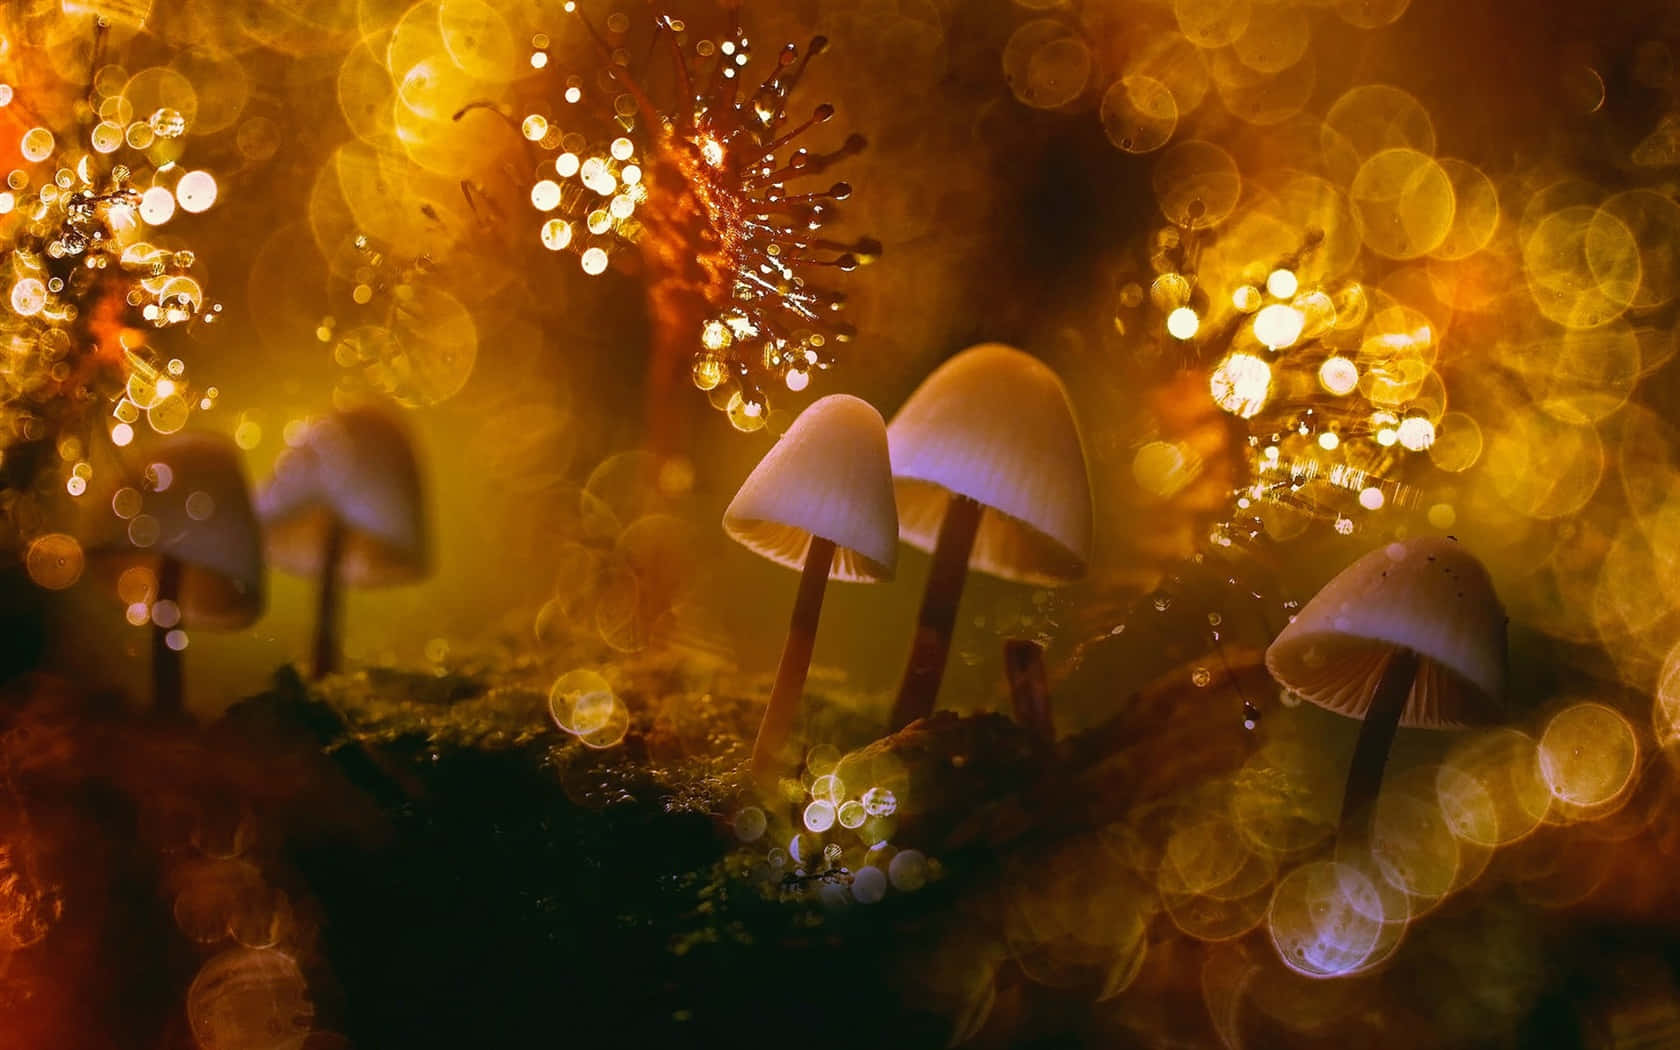 Troop Of Psilocybe Fungus On Glowing Bokeh Backdrop Picture